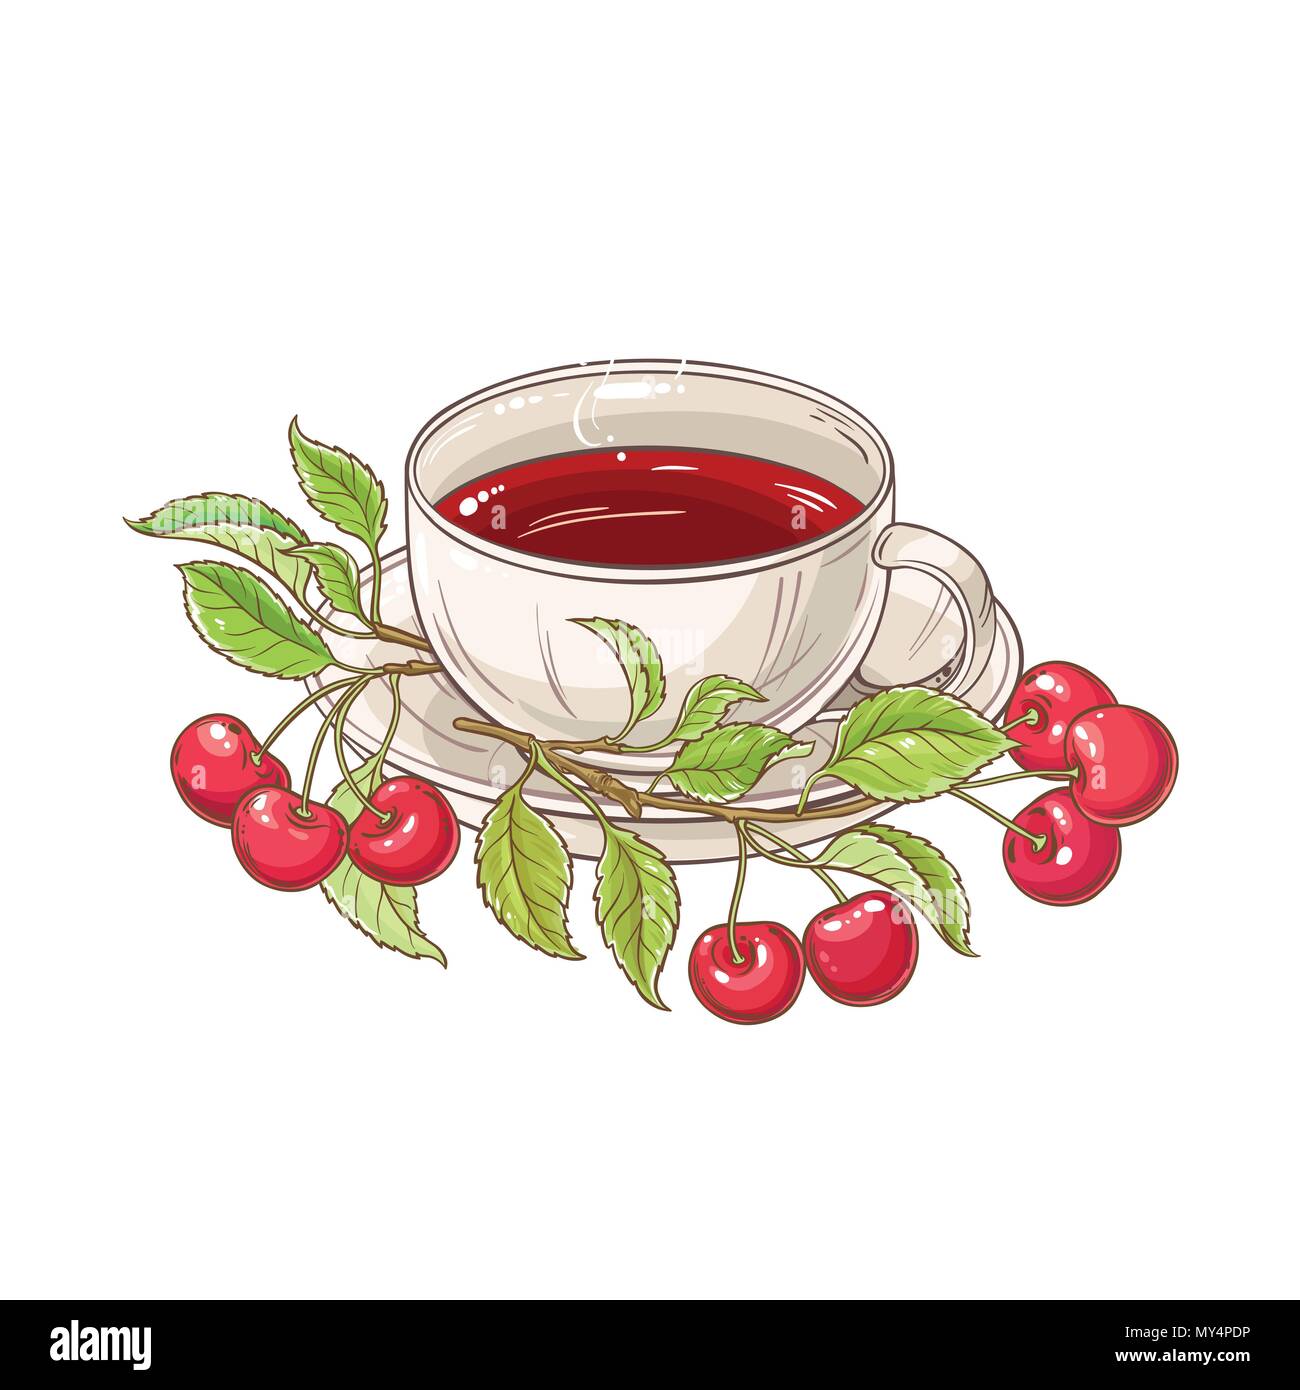 cup of cherry tea illustration on white background Stock Vector